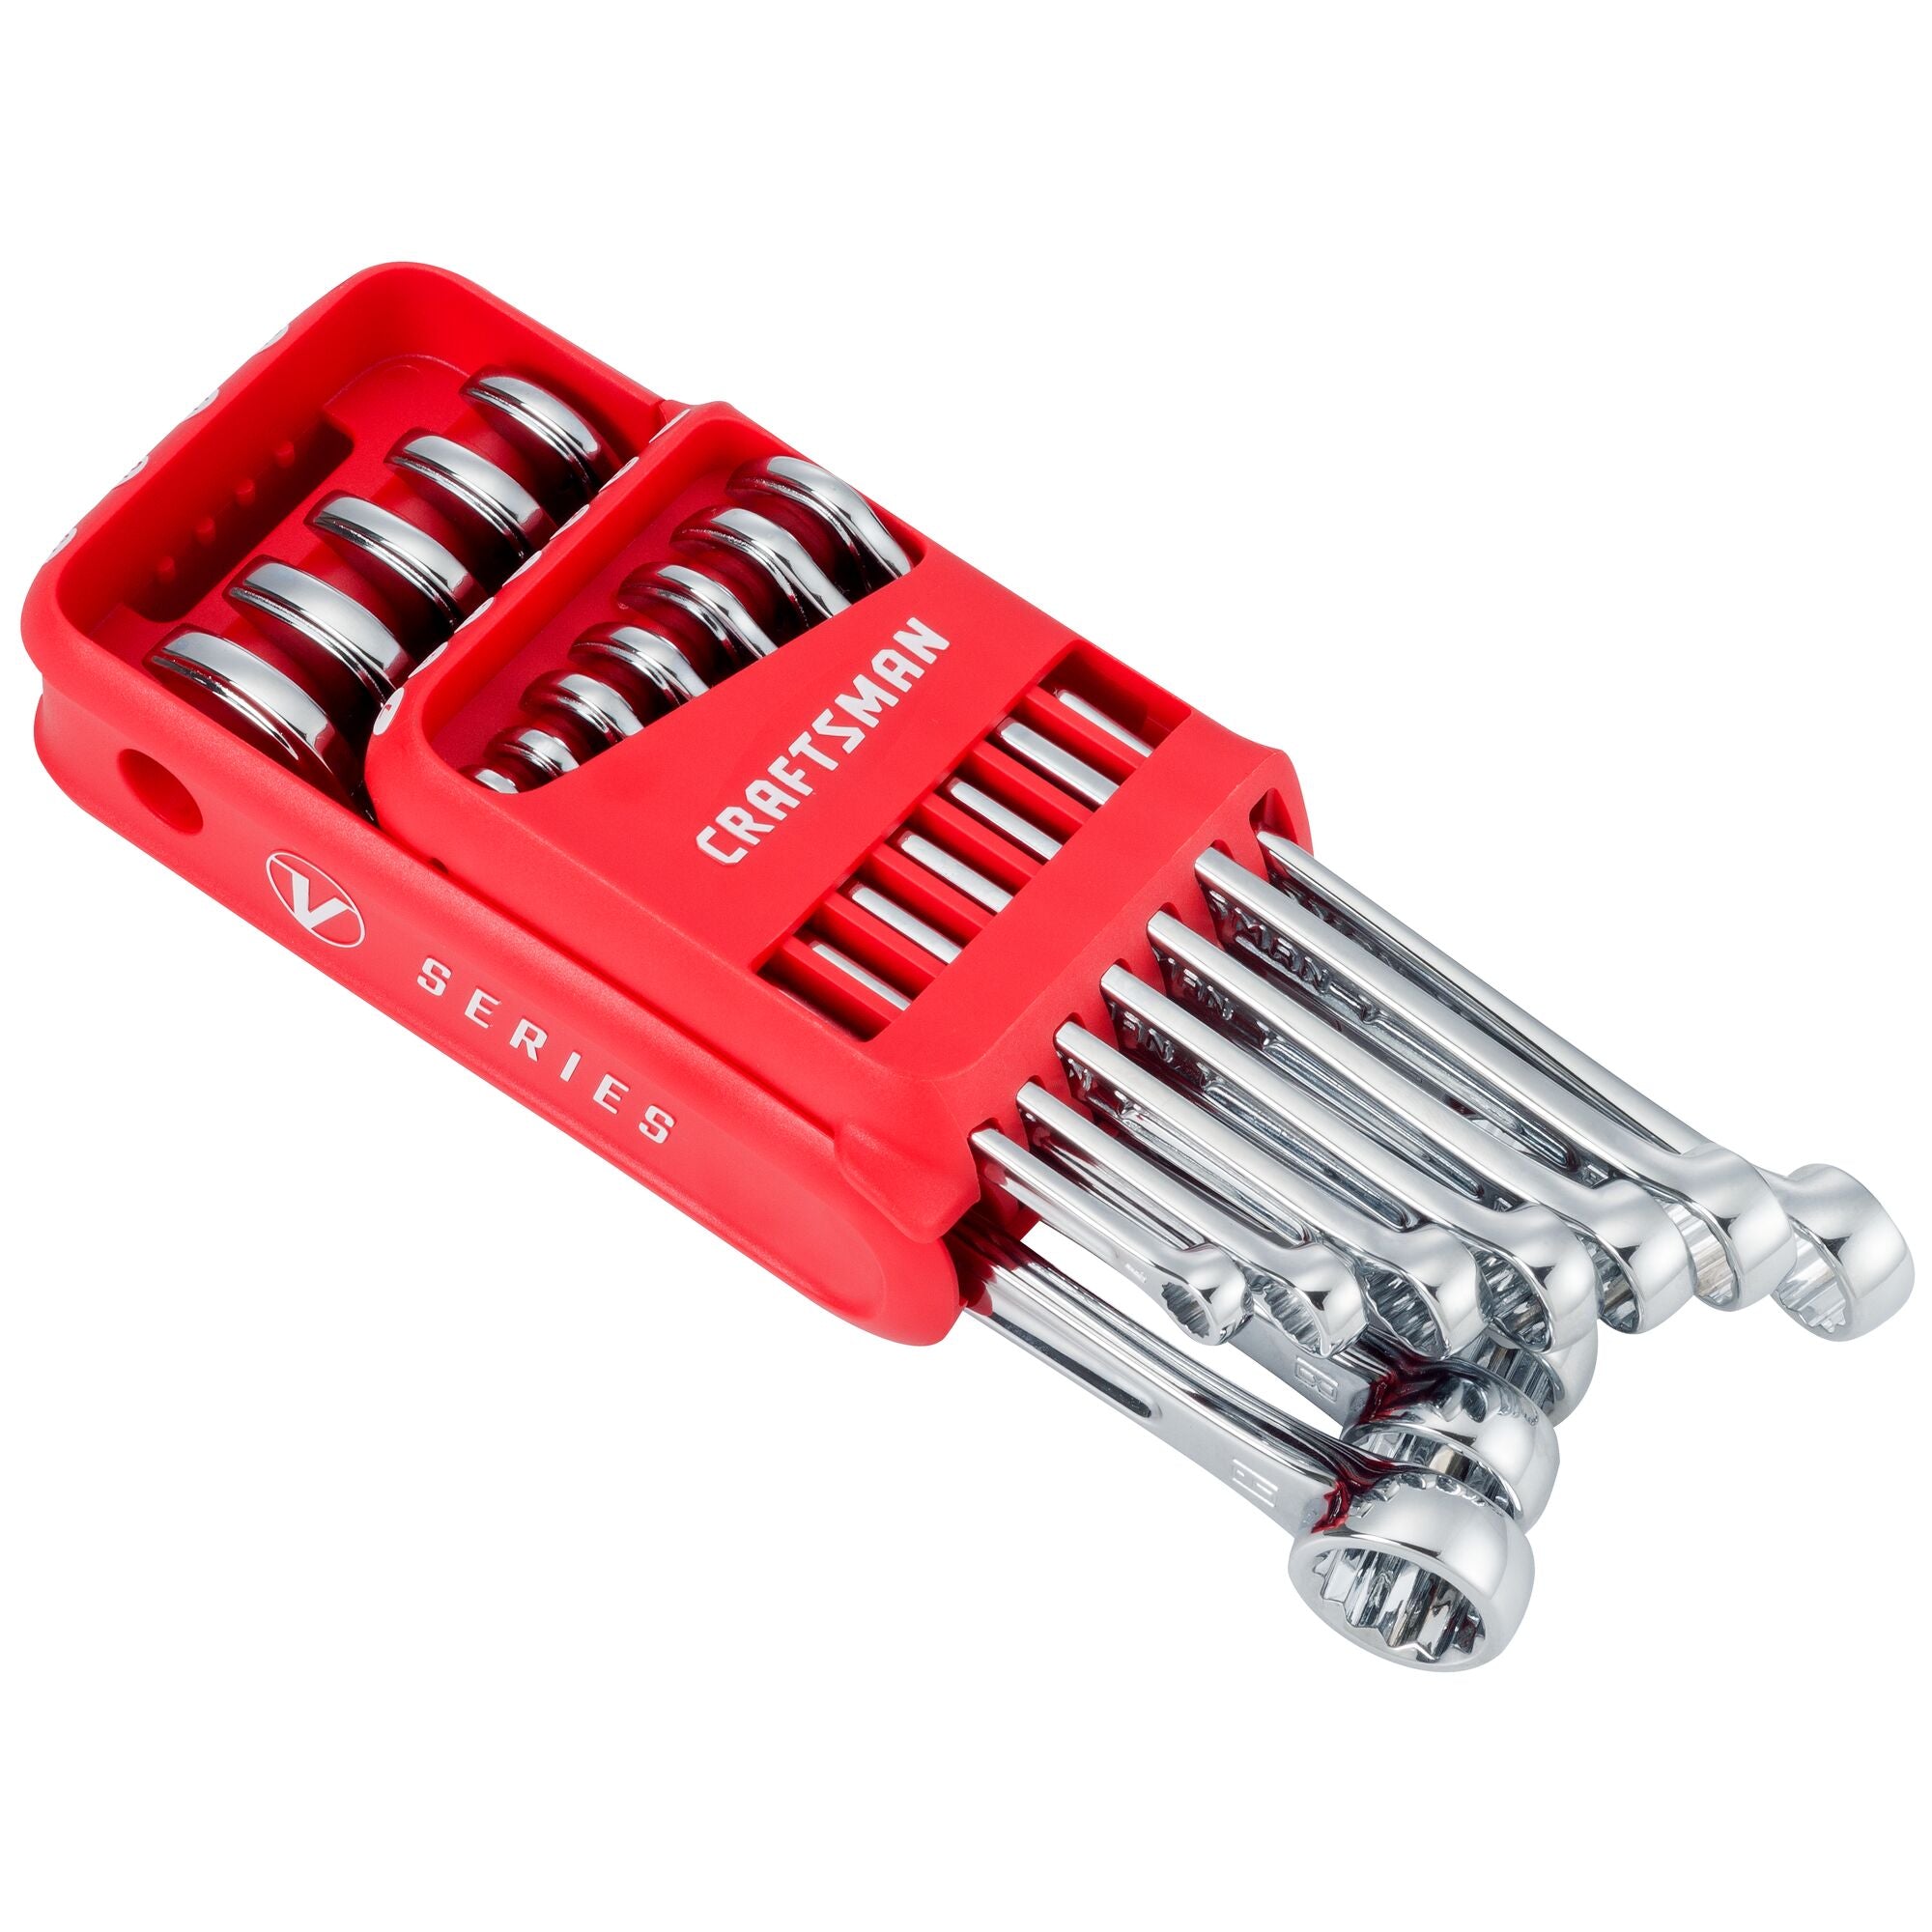 V-Series™ Metric Combination Wrench Set (12 pc) | CRAFTSMAN